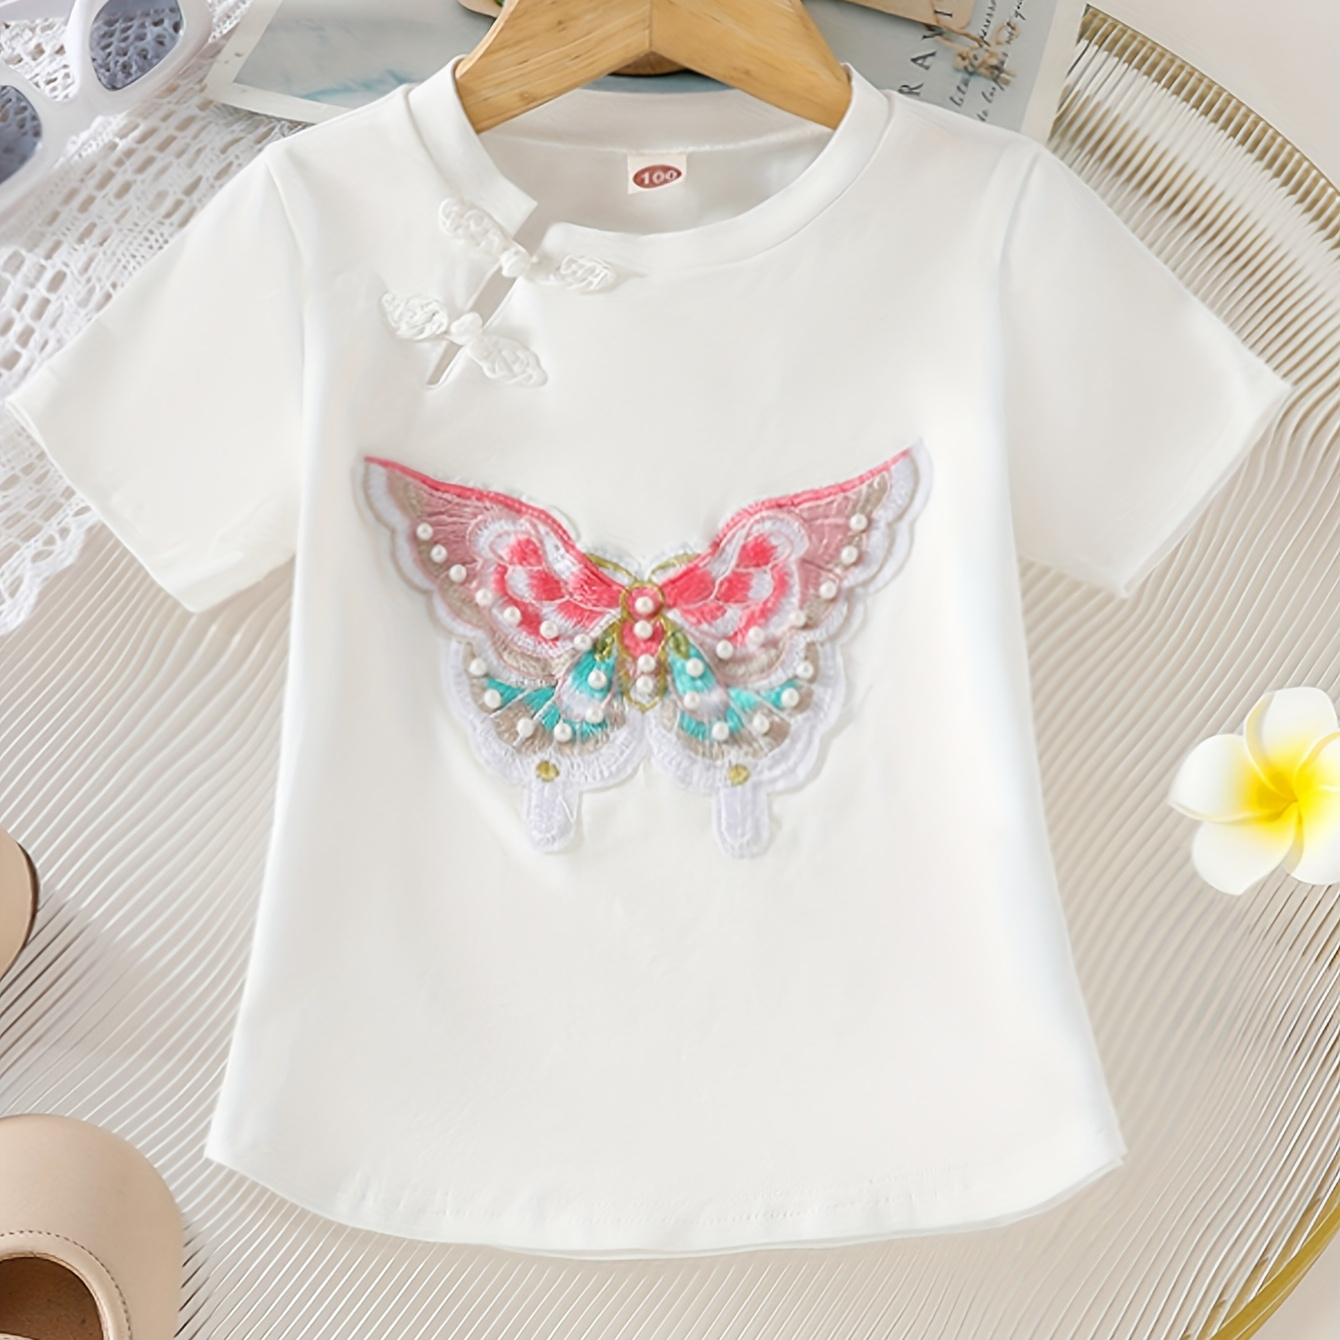 

Butterfly Embroidery 95% Cotton Short Sleeve T-shirt, Elegant Girl's Chinese Vintage Style Tees For Summer Gift